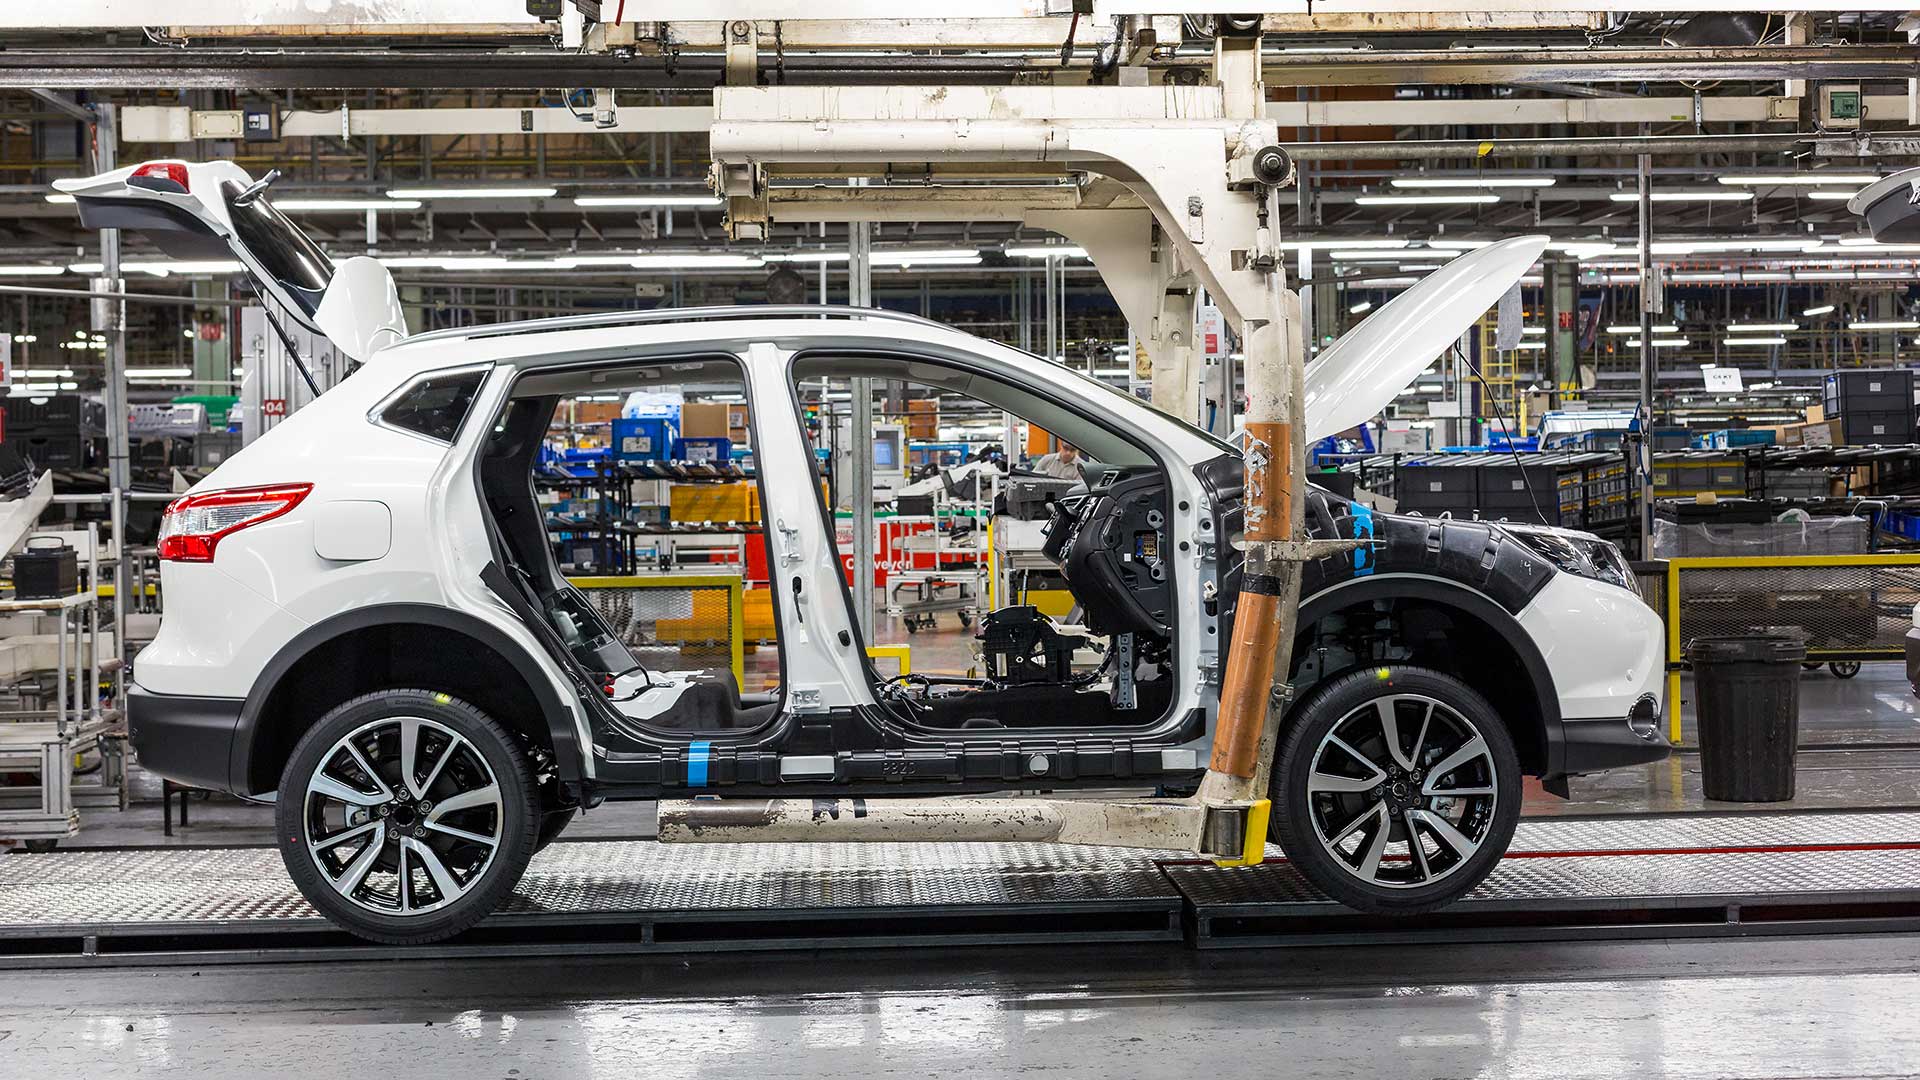 No New Nissan X-Trail for Sunderland with Brexit a factor